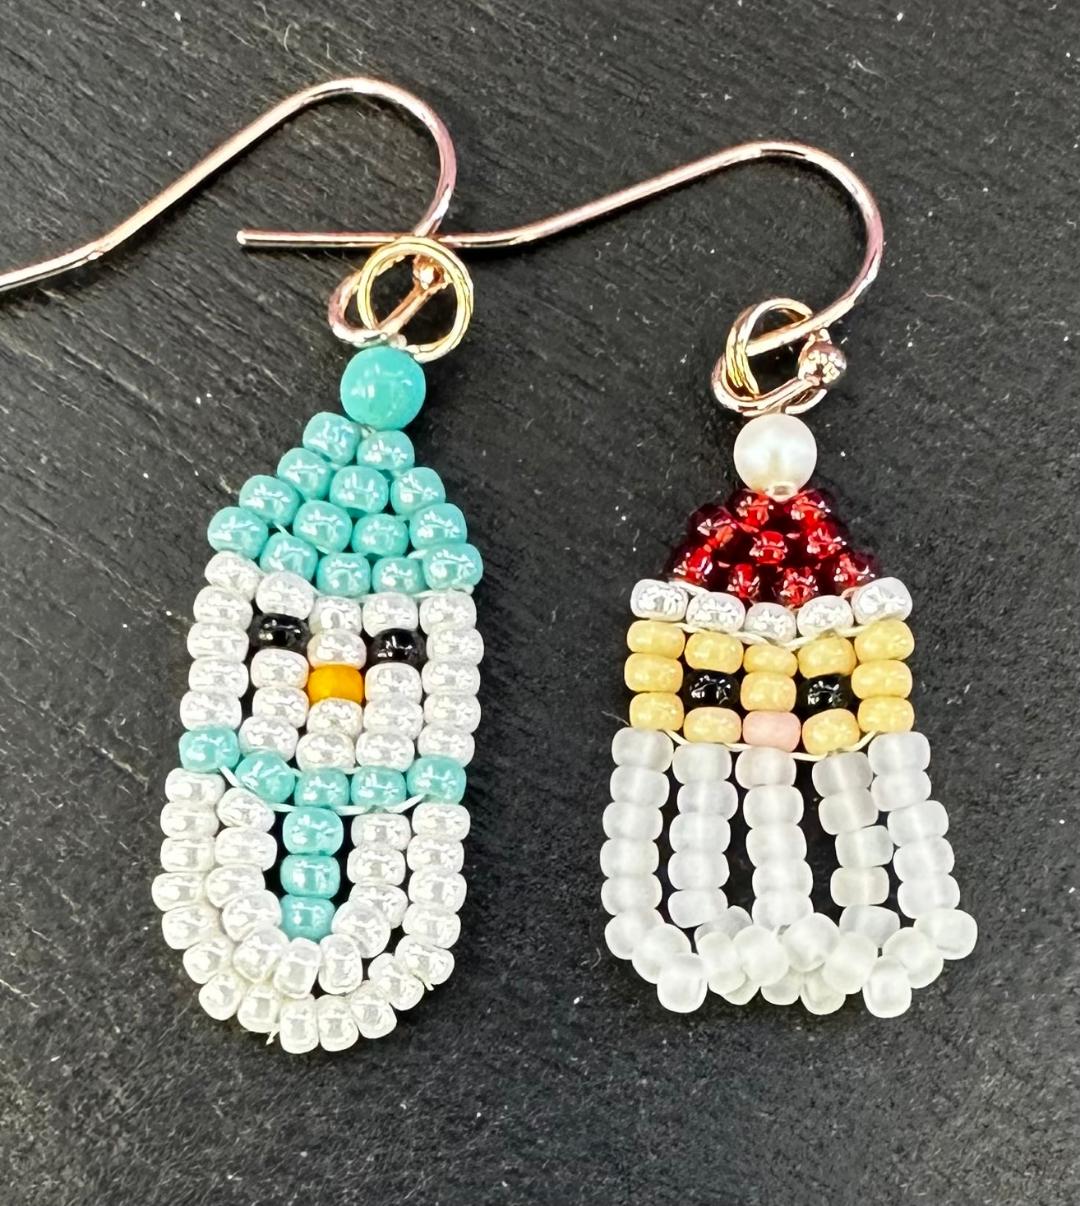 11-18-23 Santa or Snowman Earrings An earring gift from Geri - Kit $5.00 - These are ever so cute! Geri 11:00-12:00